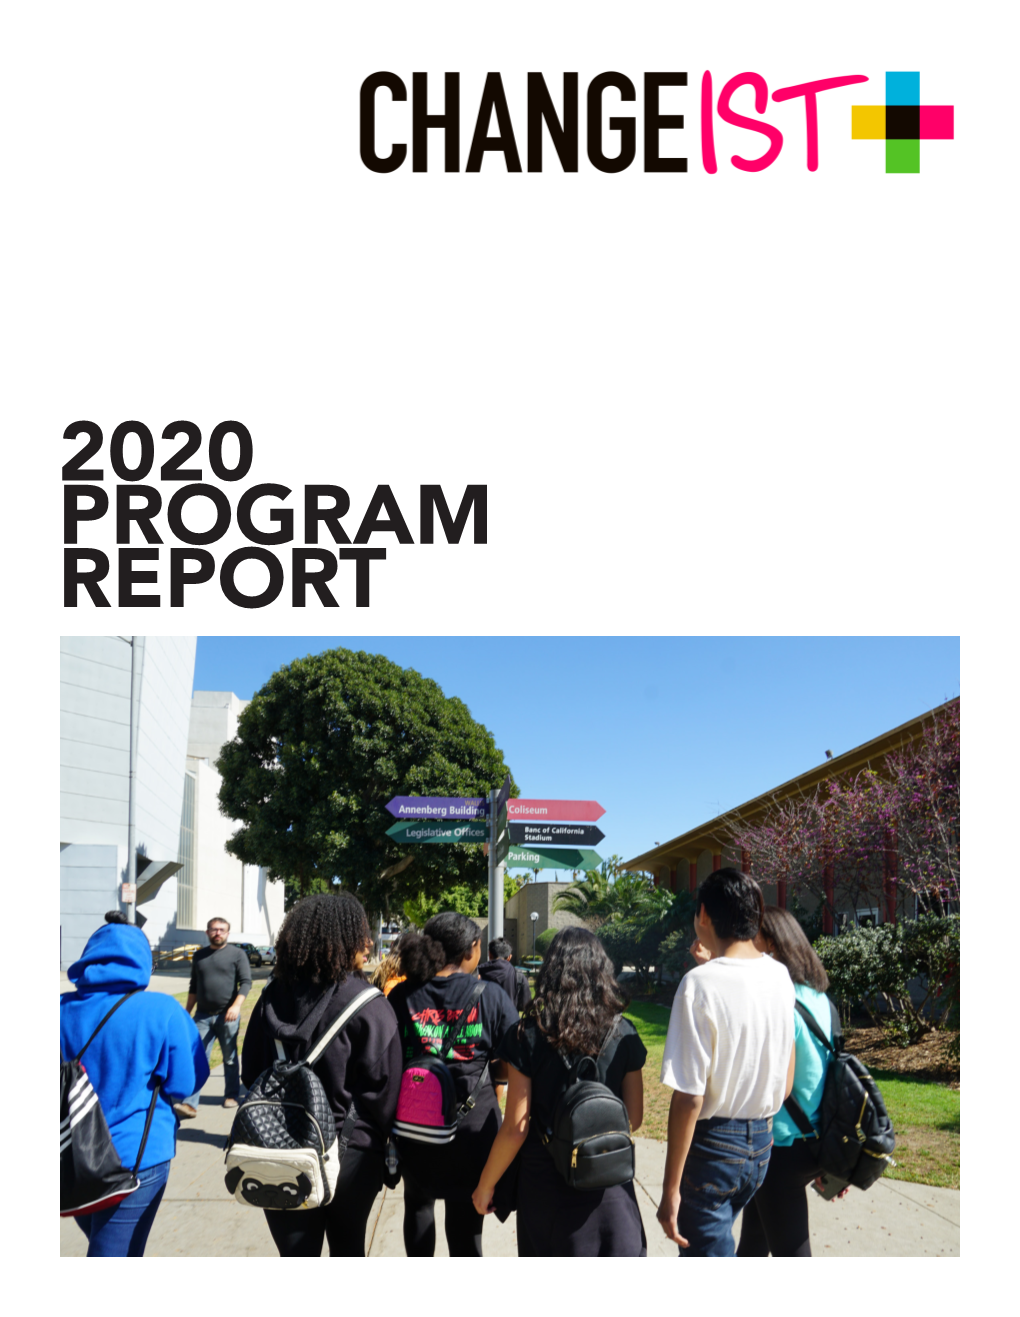 2020 Program Report What a Year This Has Been for Changeist